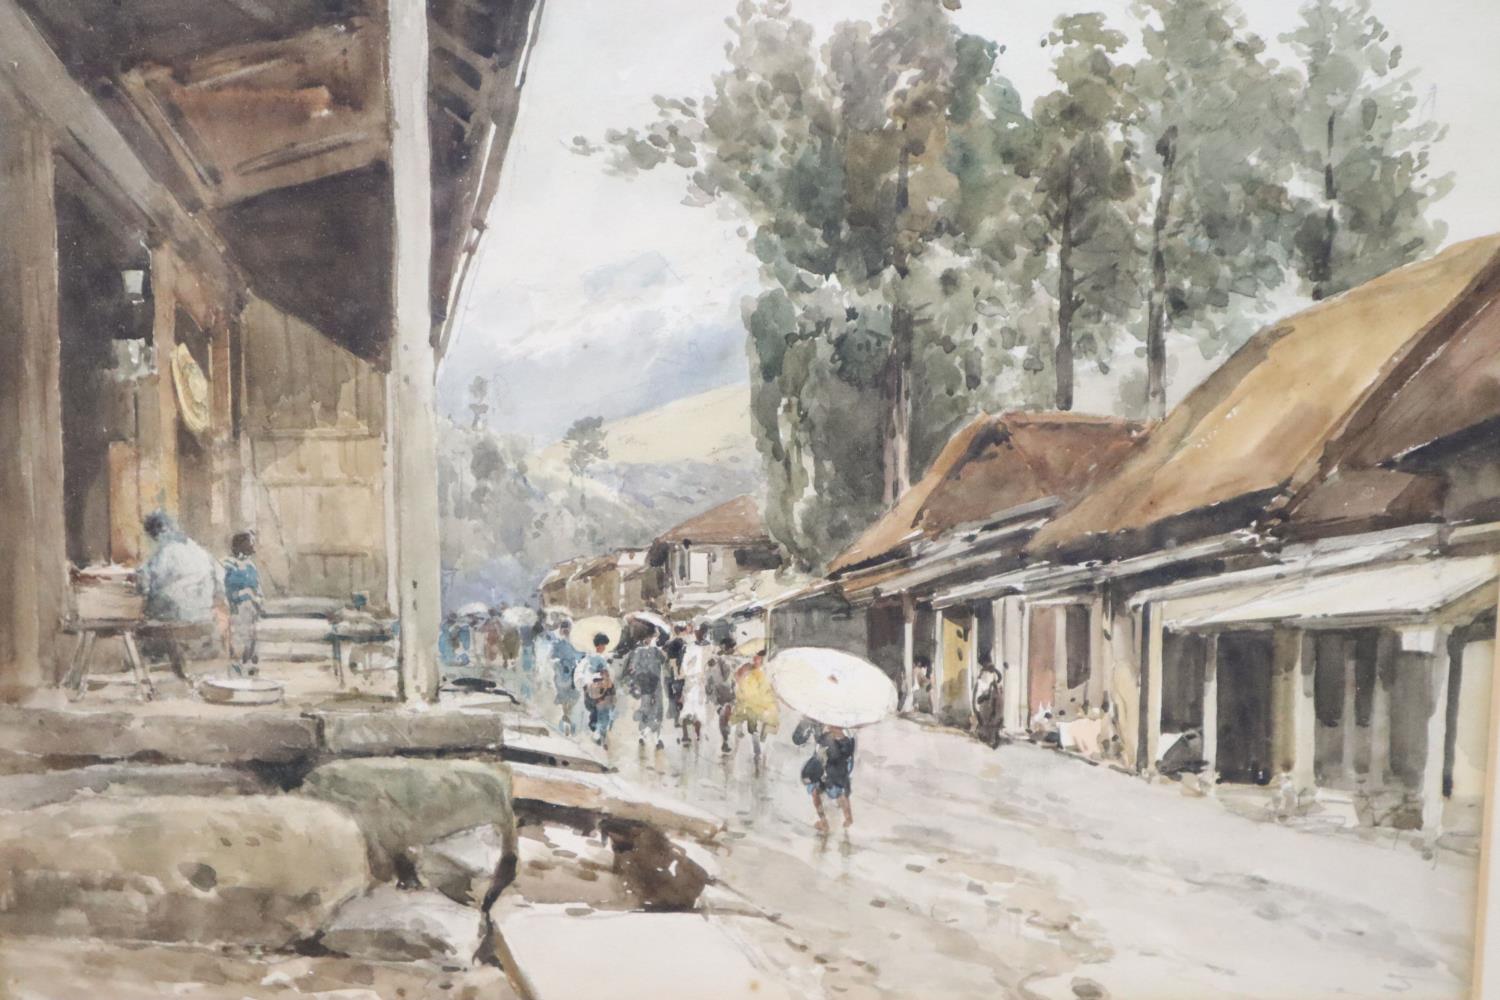 John Varley Junior (c.1850-1899), watercolour, "A Rainy Day in Nikko Street, Japan", signed and